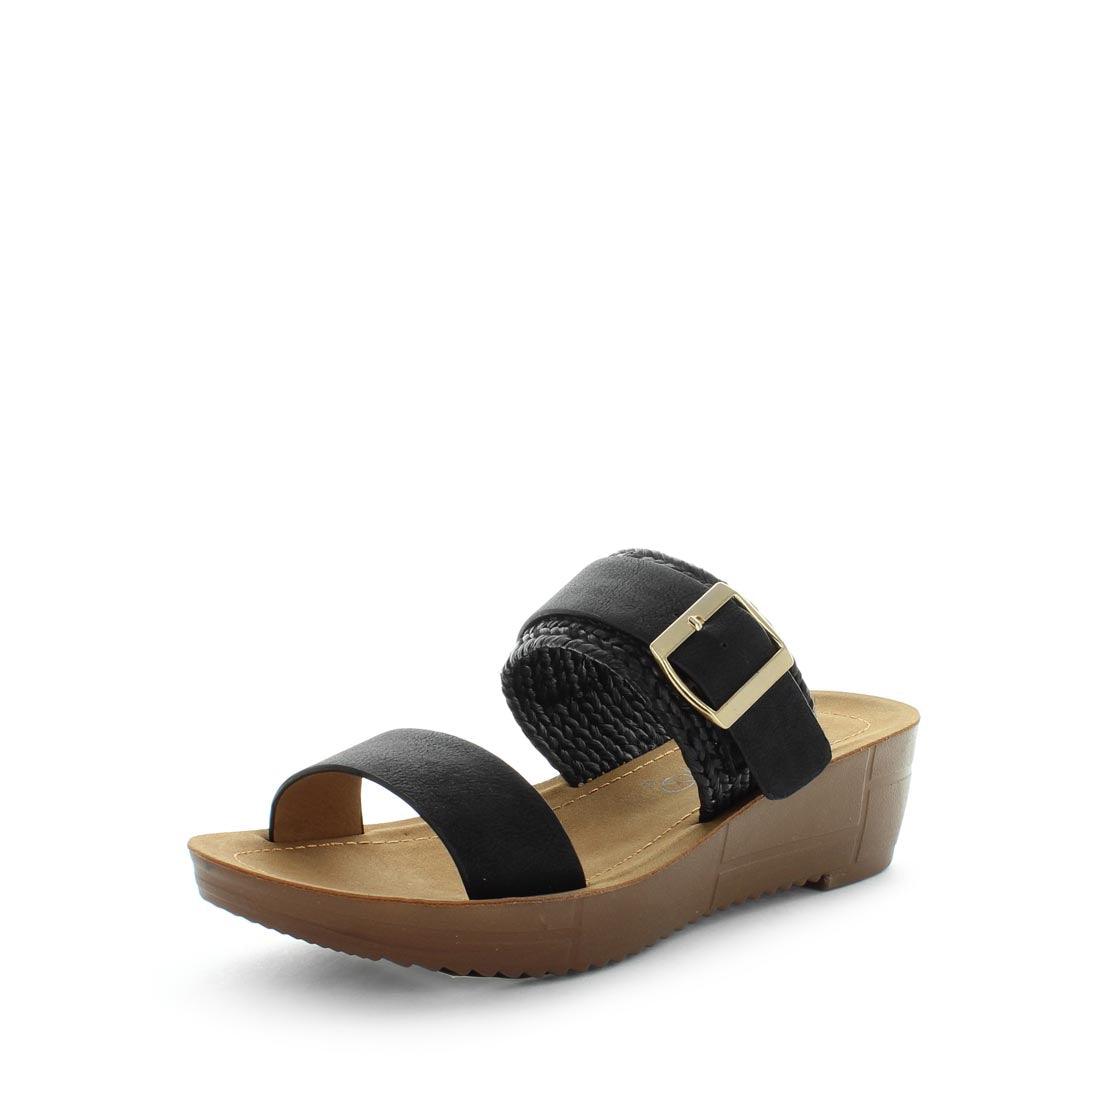 SOLLY by WILDE - iShoes - NEW ARRIVALS, What's New, What's New: Most Popular, What's New: Women's New Arrivals, Women's Shoes: Sandals - FOOTWEAR-FOOTWEAR